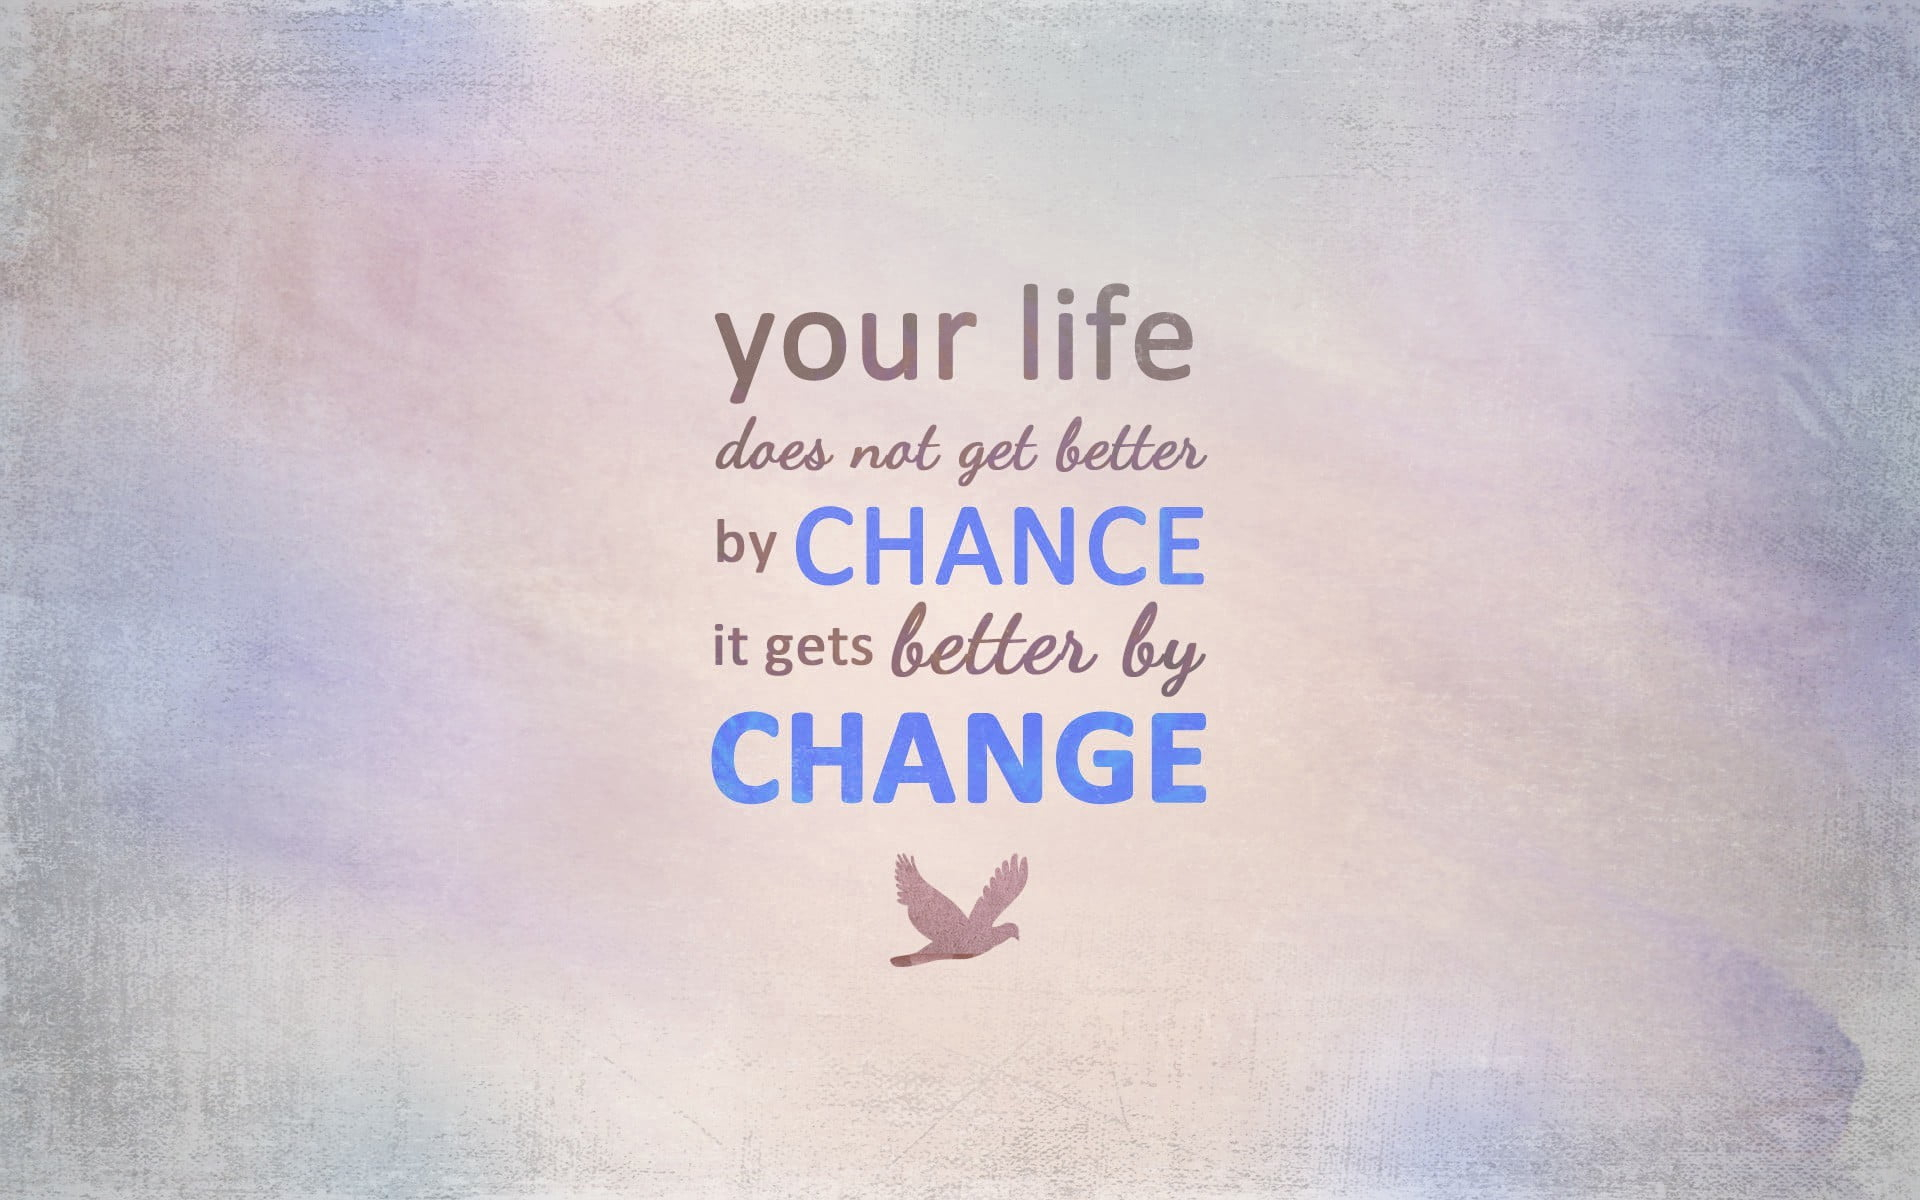 Wallpaper your life does not get better by chance it gets better by change text overlay